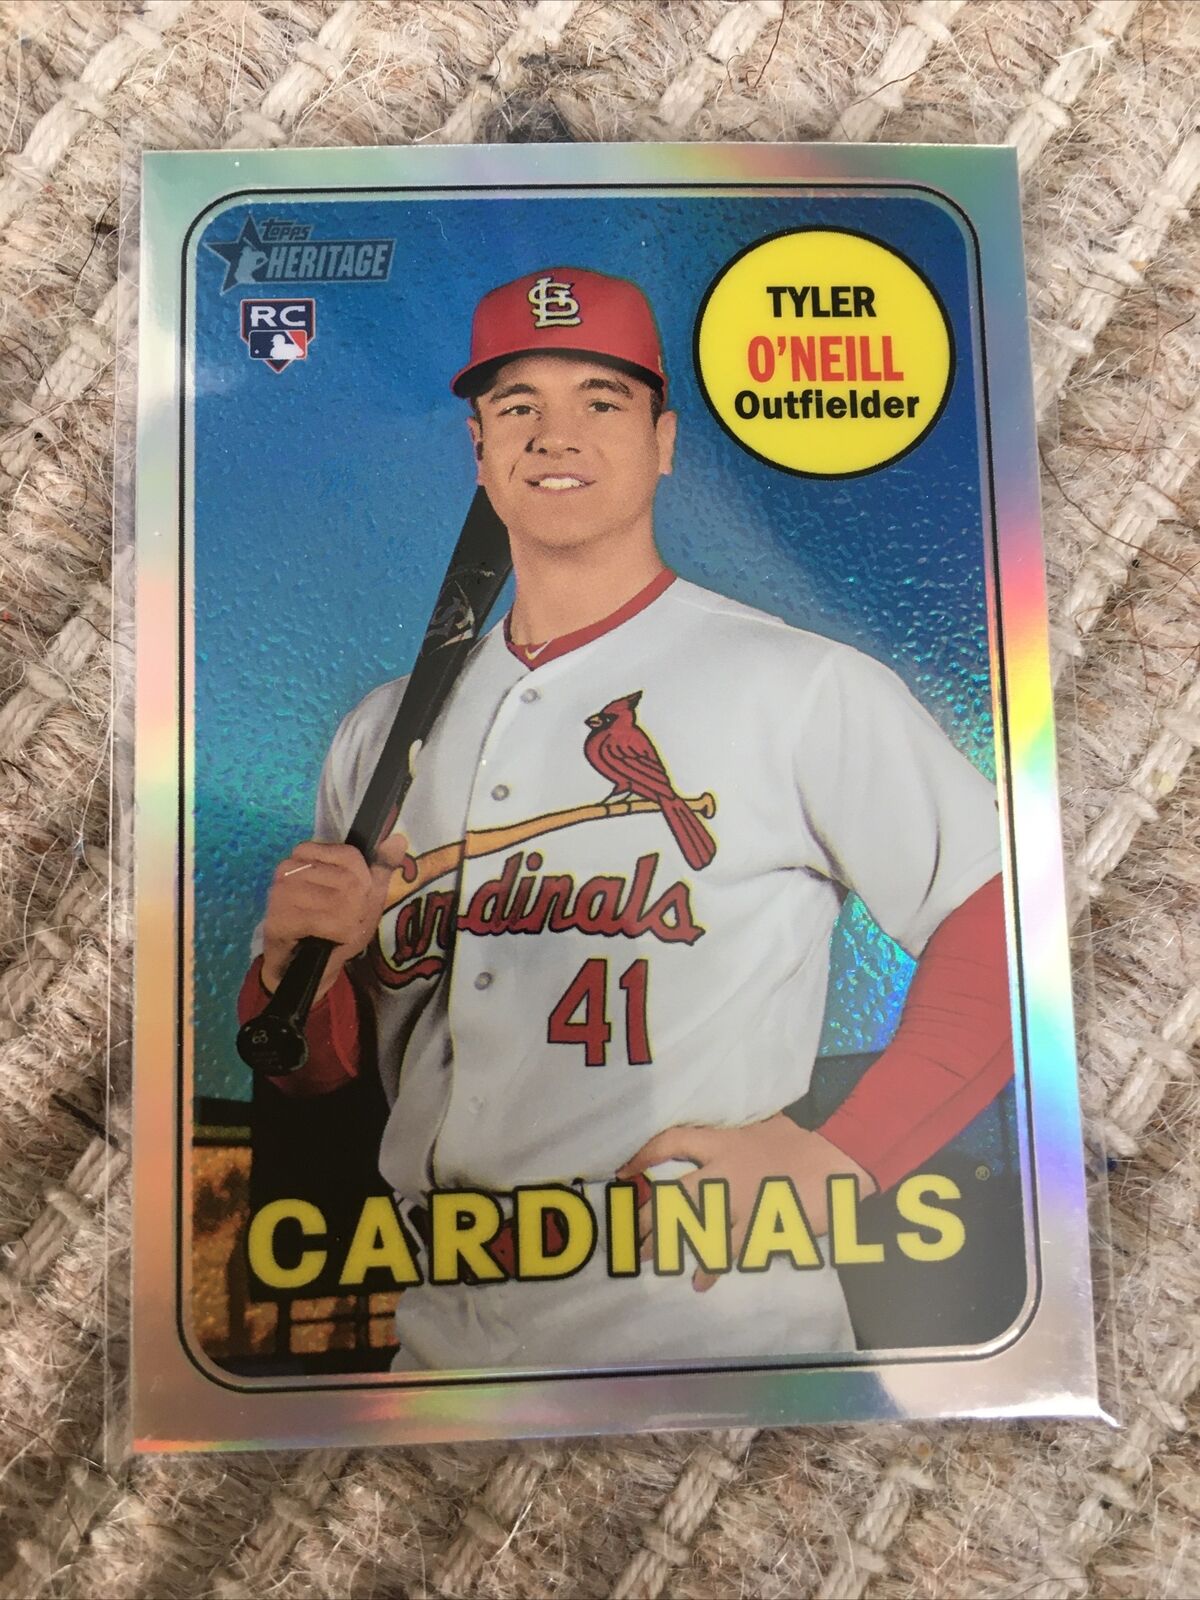 2018 Topps Heritage High Number TYLER O'NEILL RC Refractor Chrome #412/569